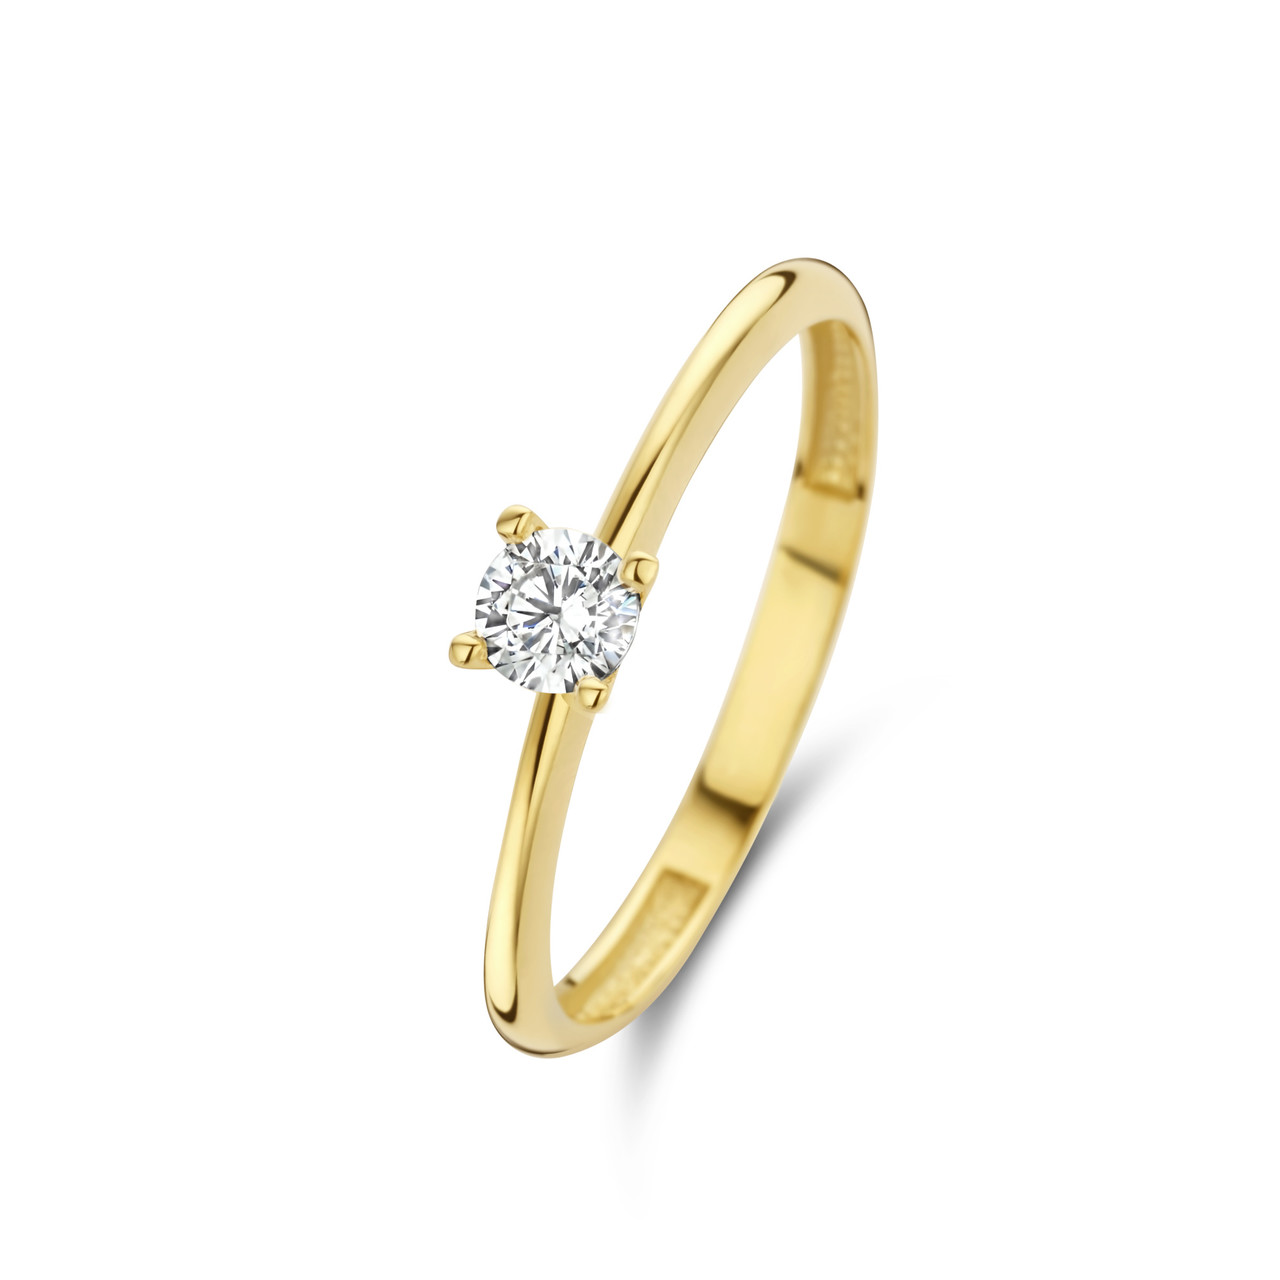 Buy quality Quad Diamond Ring in Channel Setting for Men in Pune